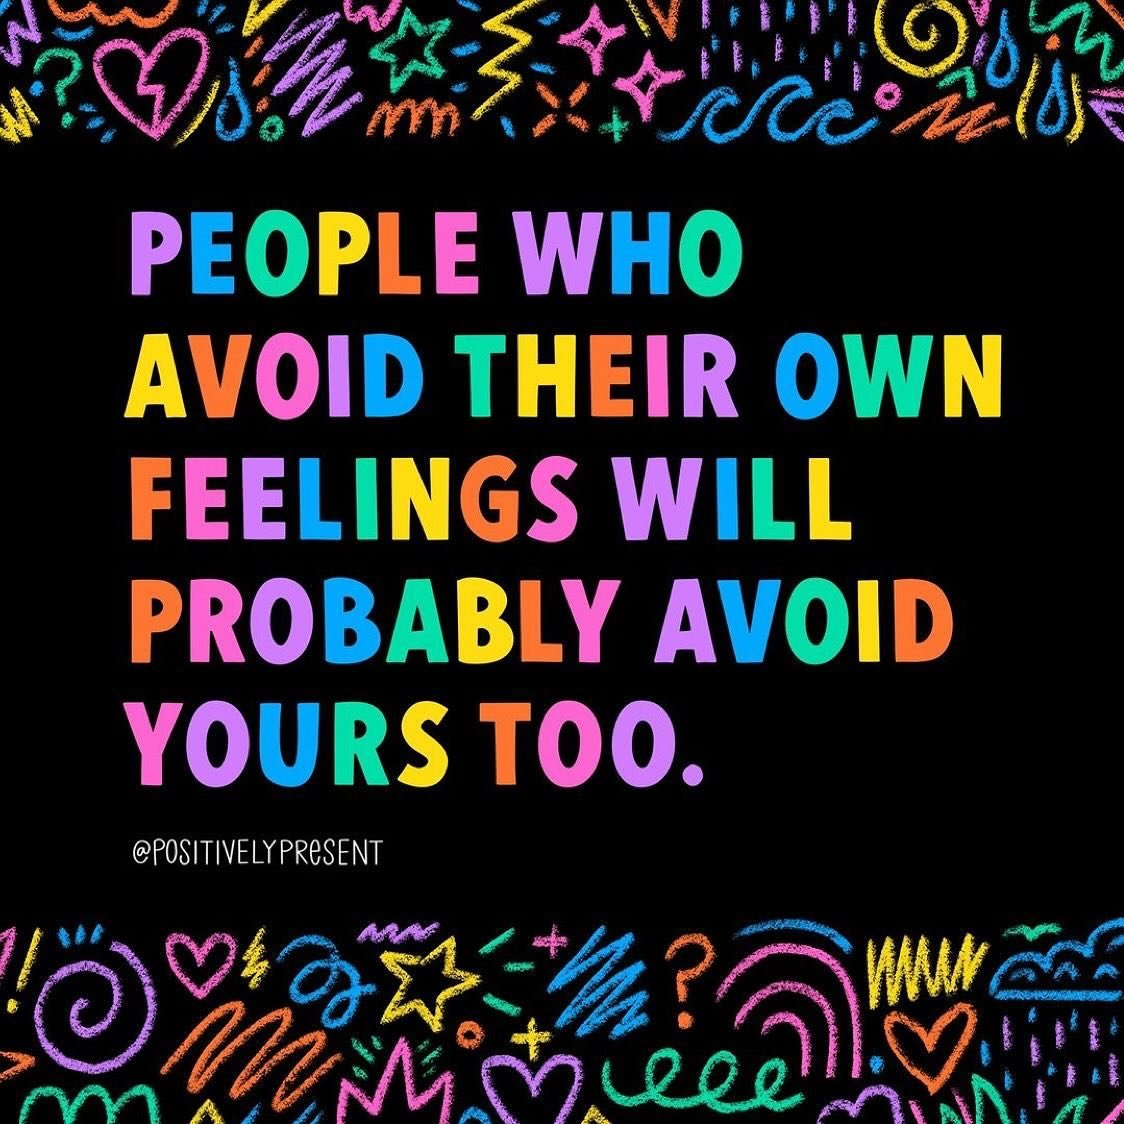 Something to consider when it comes to how others handle their emotions *and* how you handle yours.

Repost from @positivelypresent